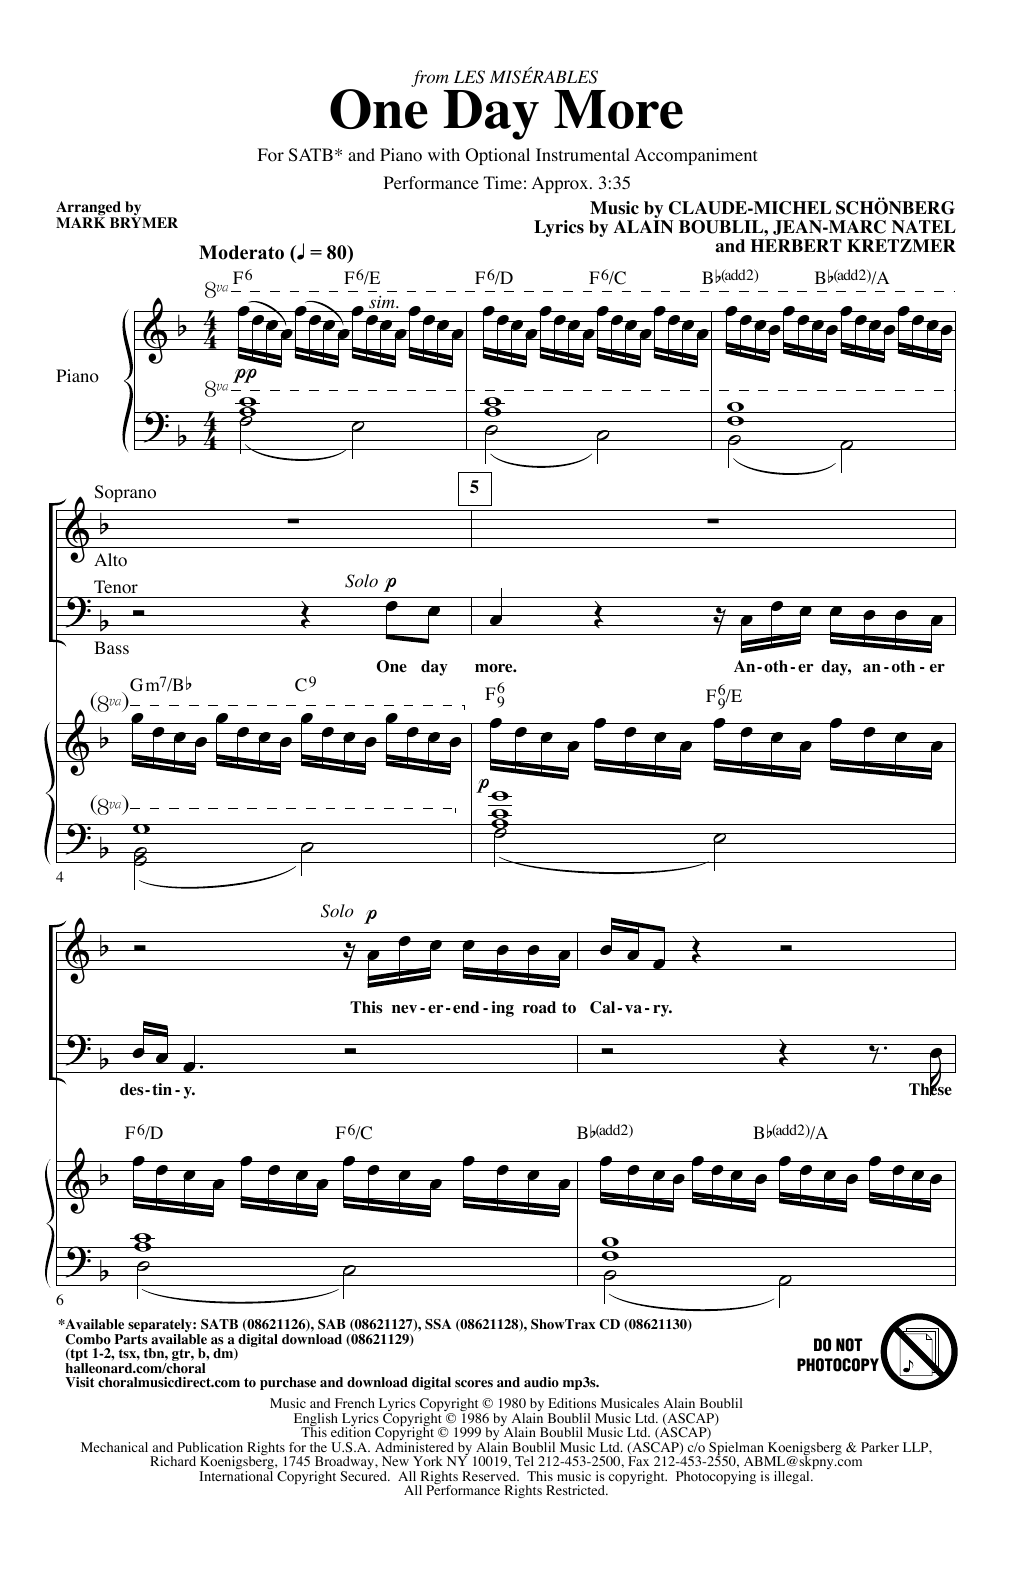 Boublil Schonberg One Day More From Les Miserables Arr Mark Brymer Sheet Music Pdf Notes Chords Musical Show Score Ssa Choir Download Printable Sku